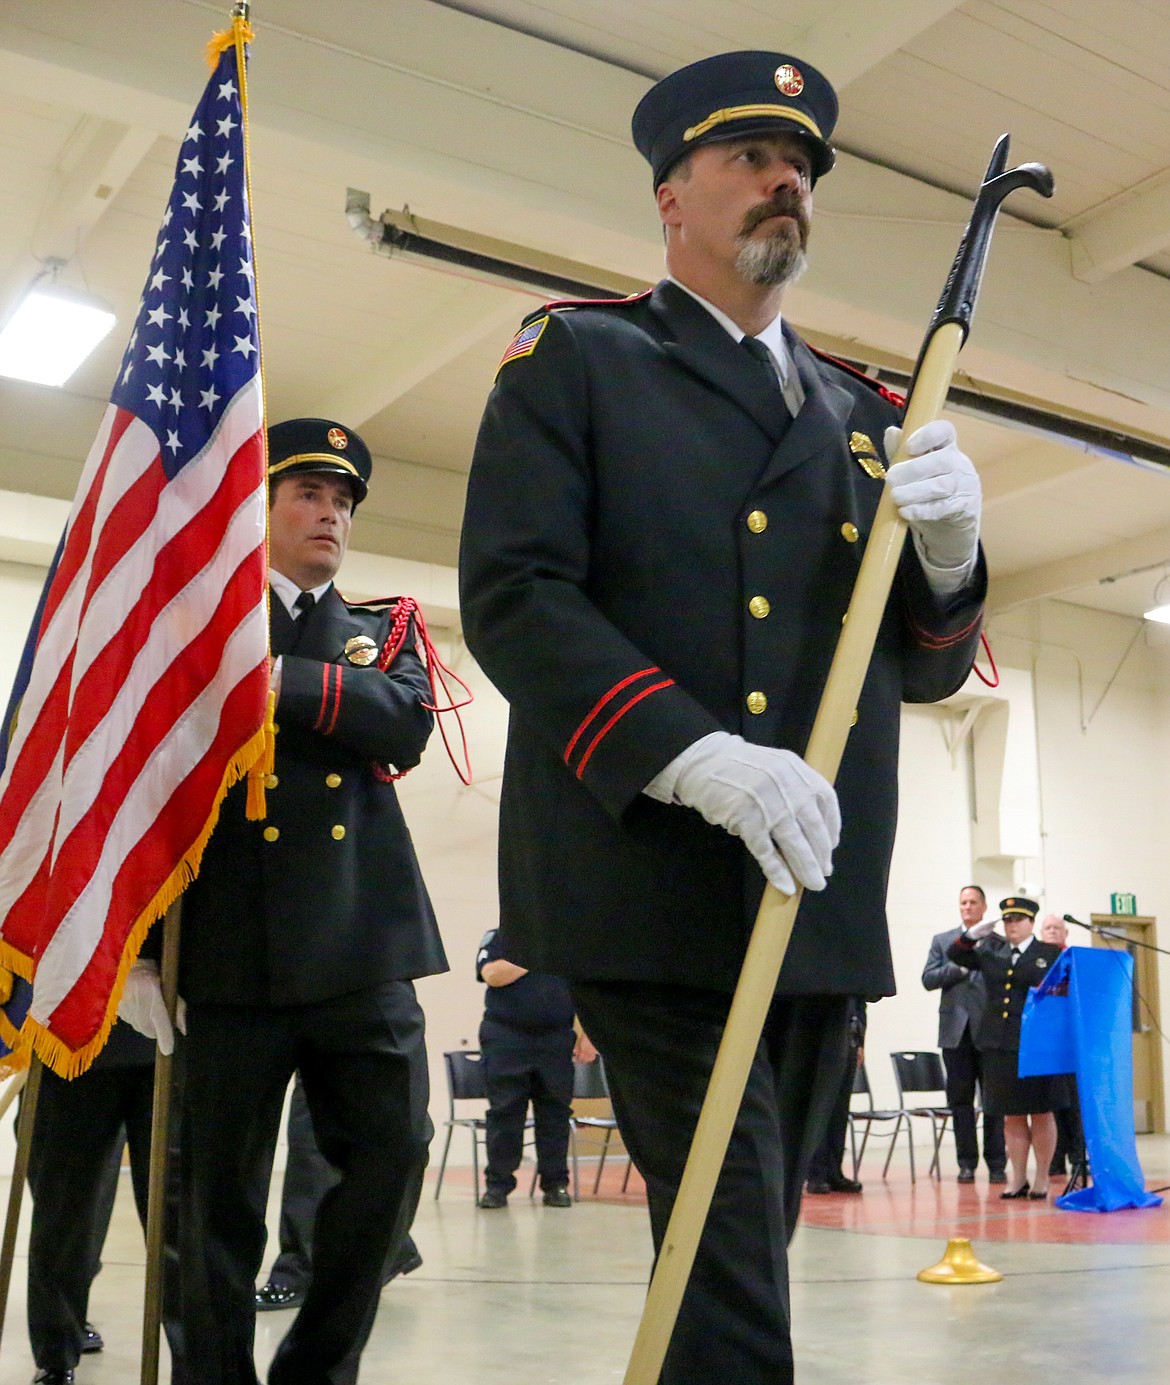 Photo by MANDI BATEMAN
Len Pine, leading the Boundary County Fire Association Honor Guard, during the National Peace Officer Memorial Observance on May 16.